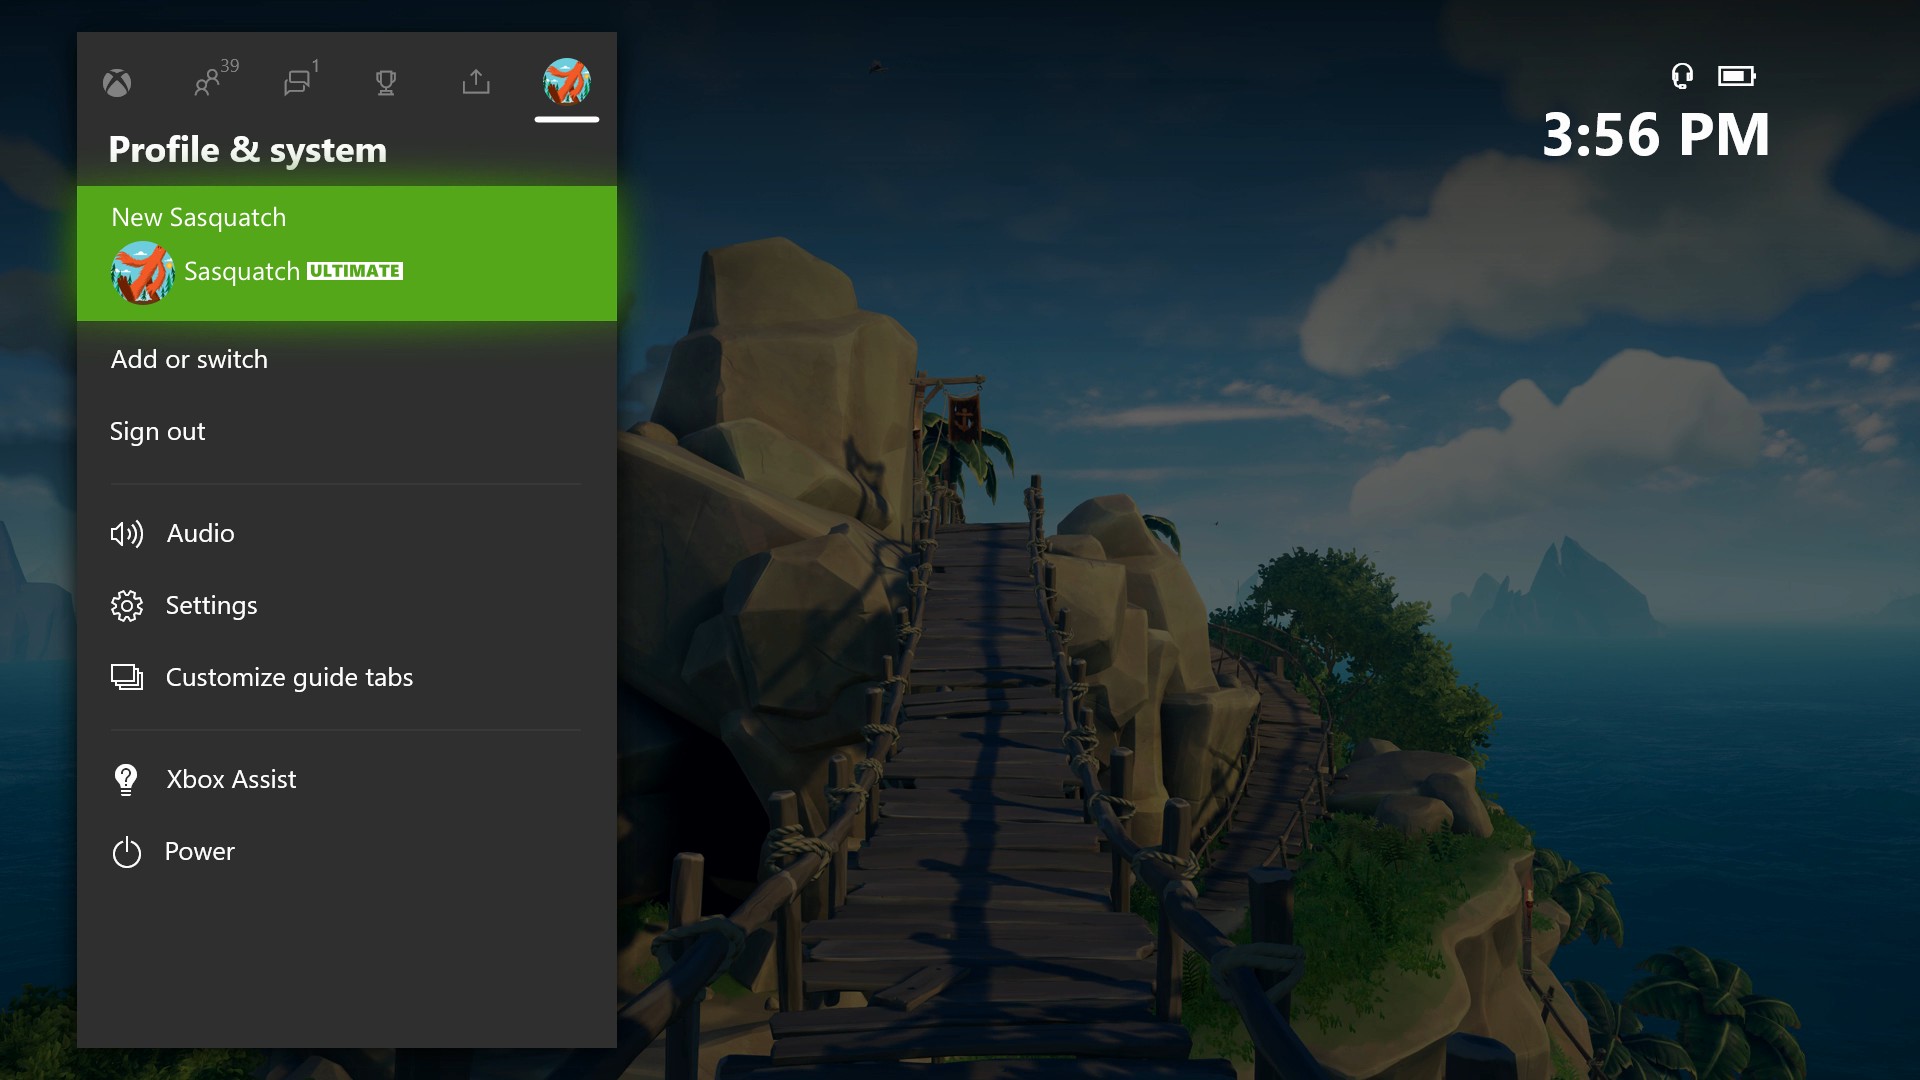 profile and system in Xbox settings